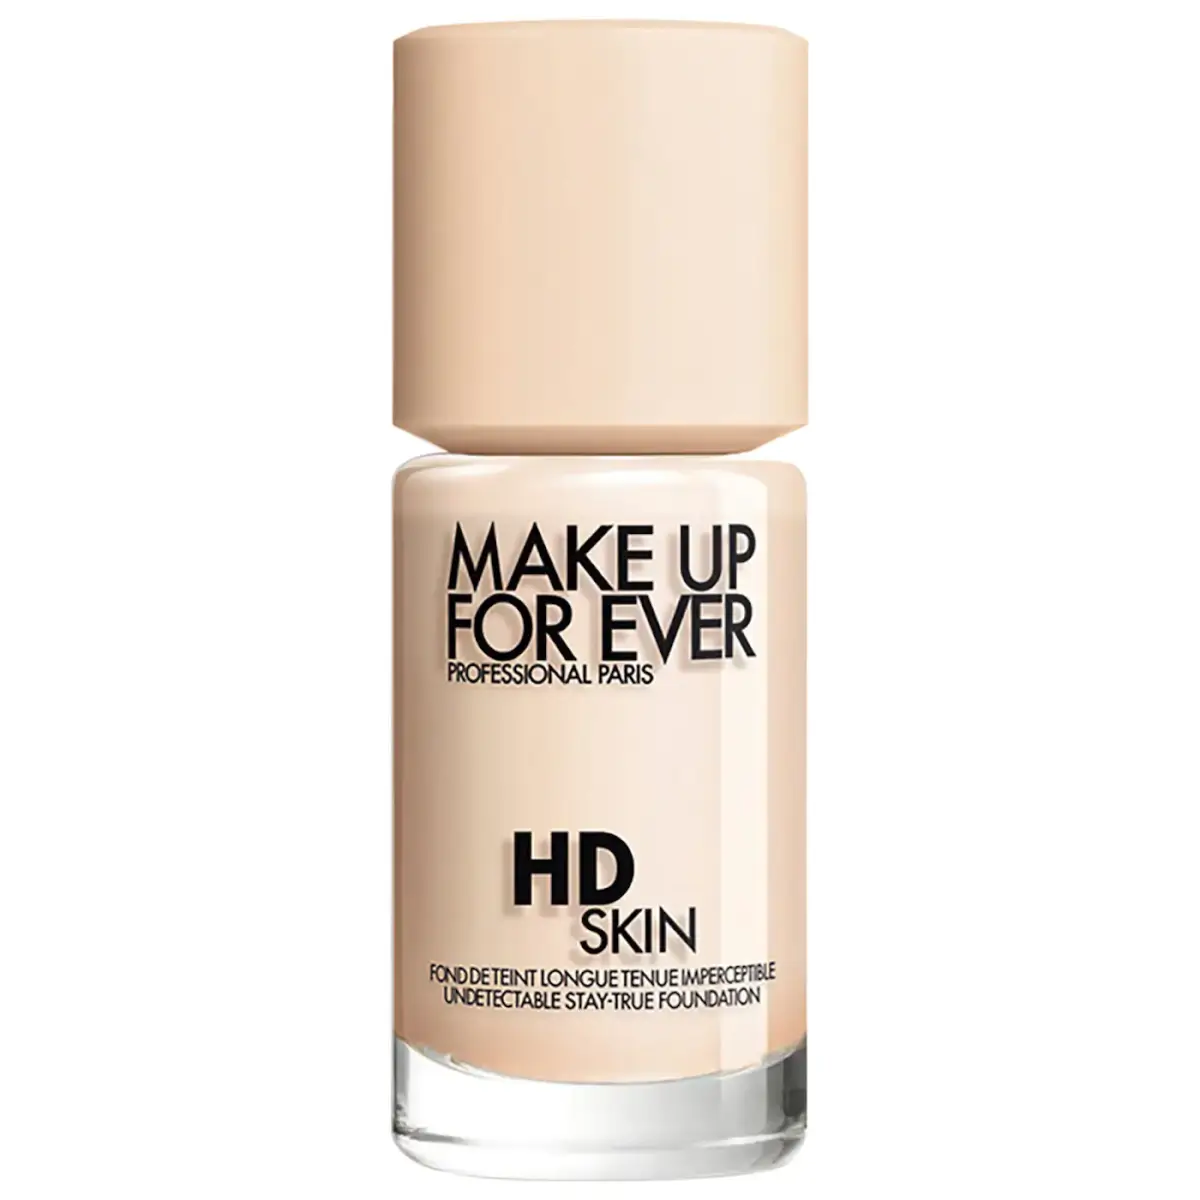 Make Up For Ever HD Skin Undetectable Longwear